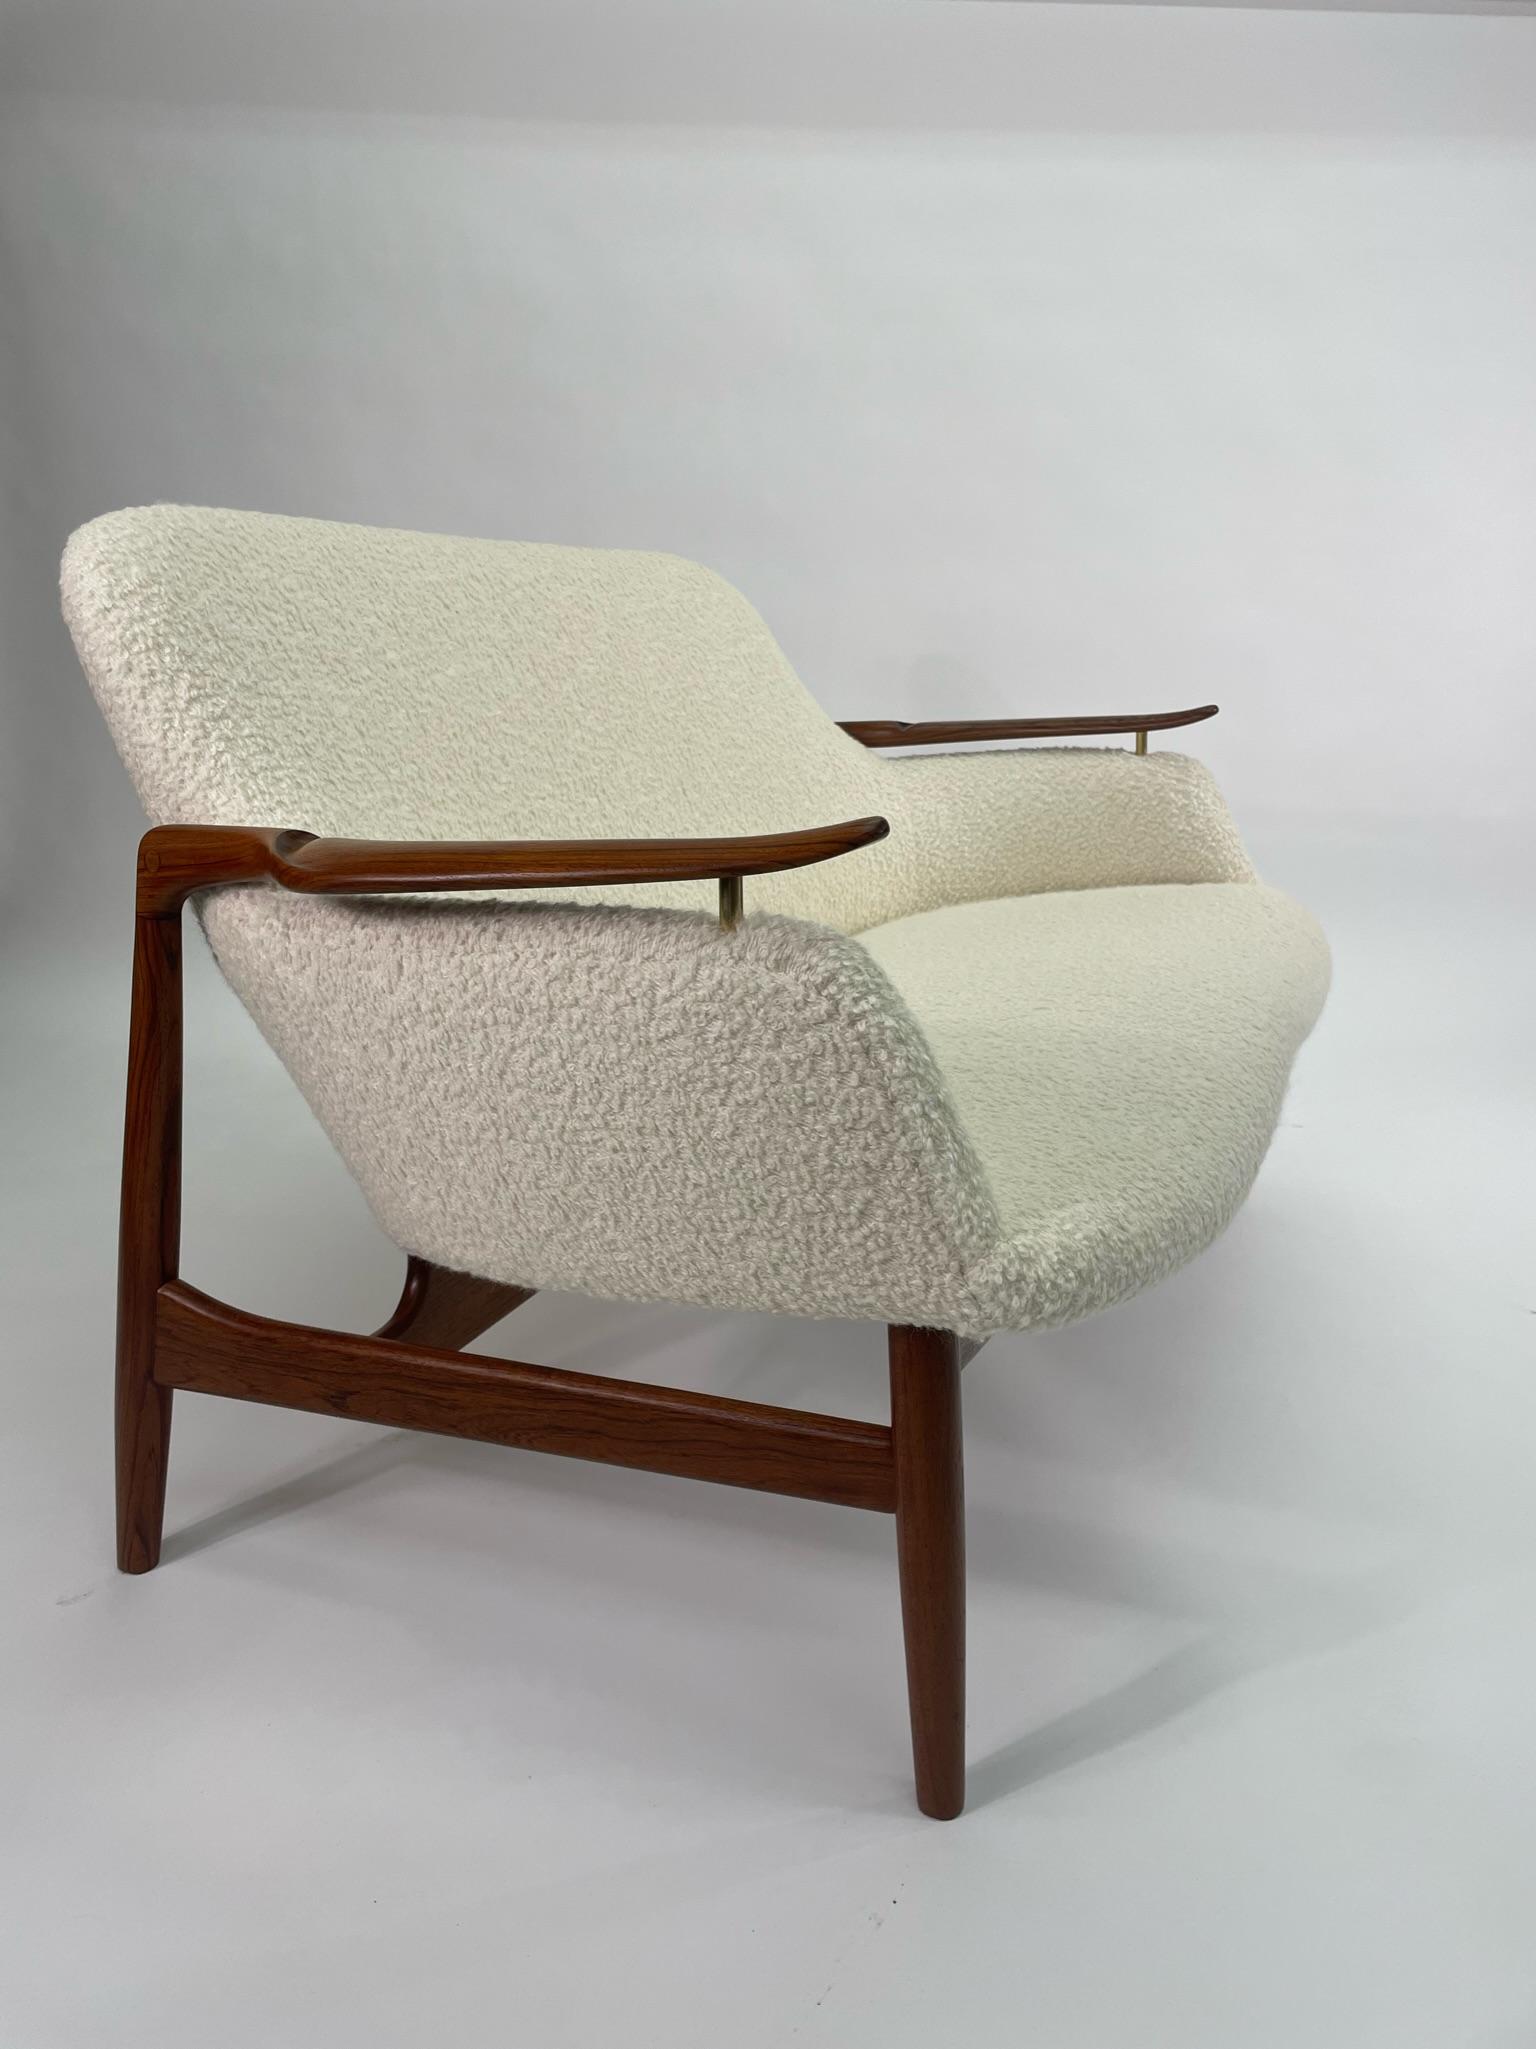 A rare example of the stunning, sculptural settee by Danish design pioneer Finn Juhl. The NV-53 is named after its cabinetmaker, Niels Vodder, and the year of its design, 1953. Its biomorphic shape—influenced by the Surrealists—and unique, floating